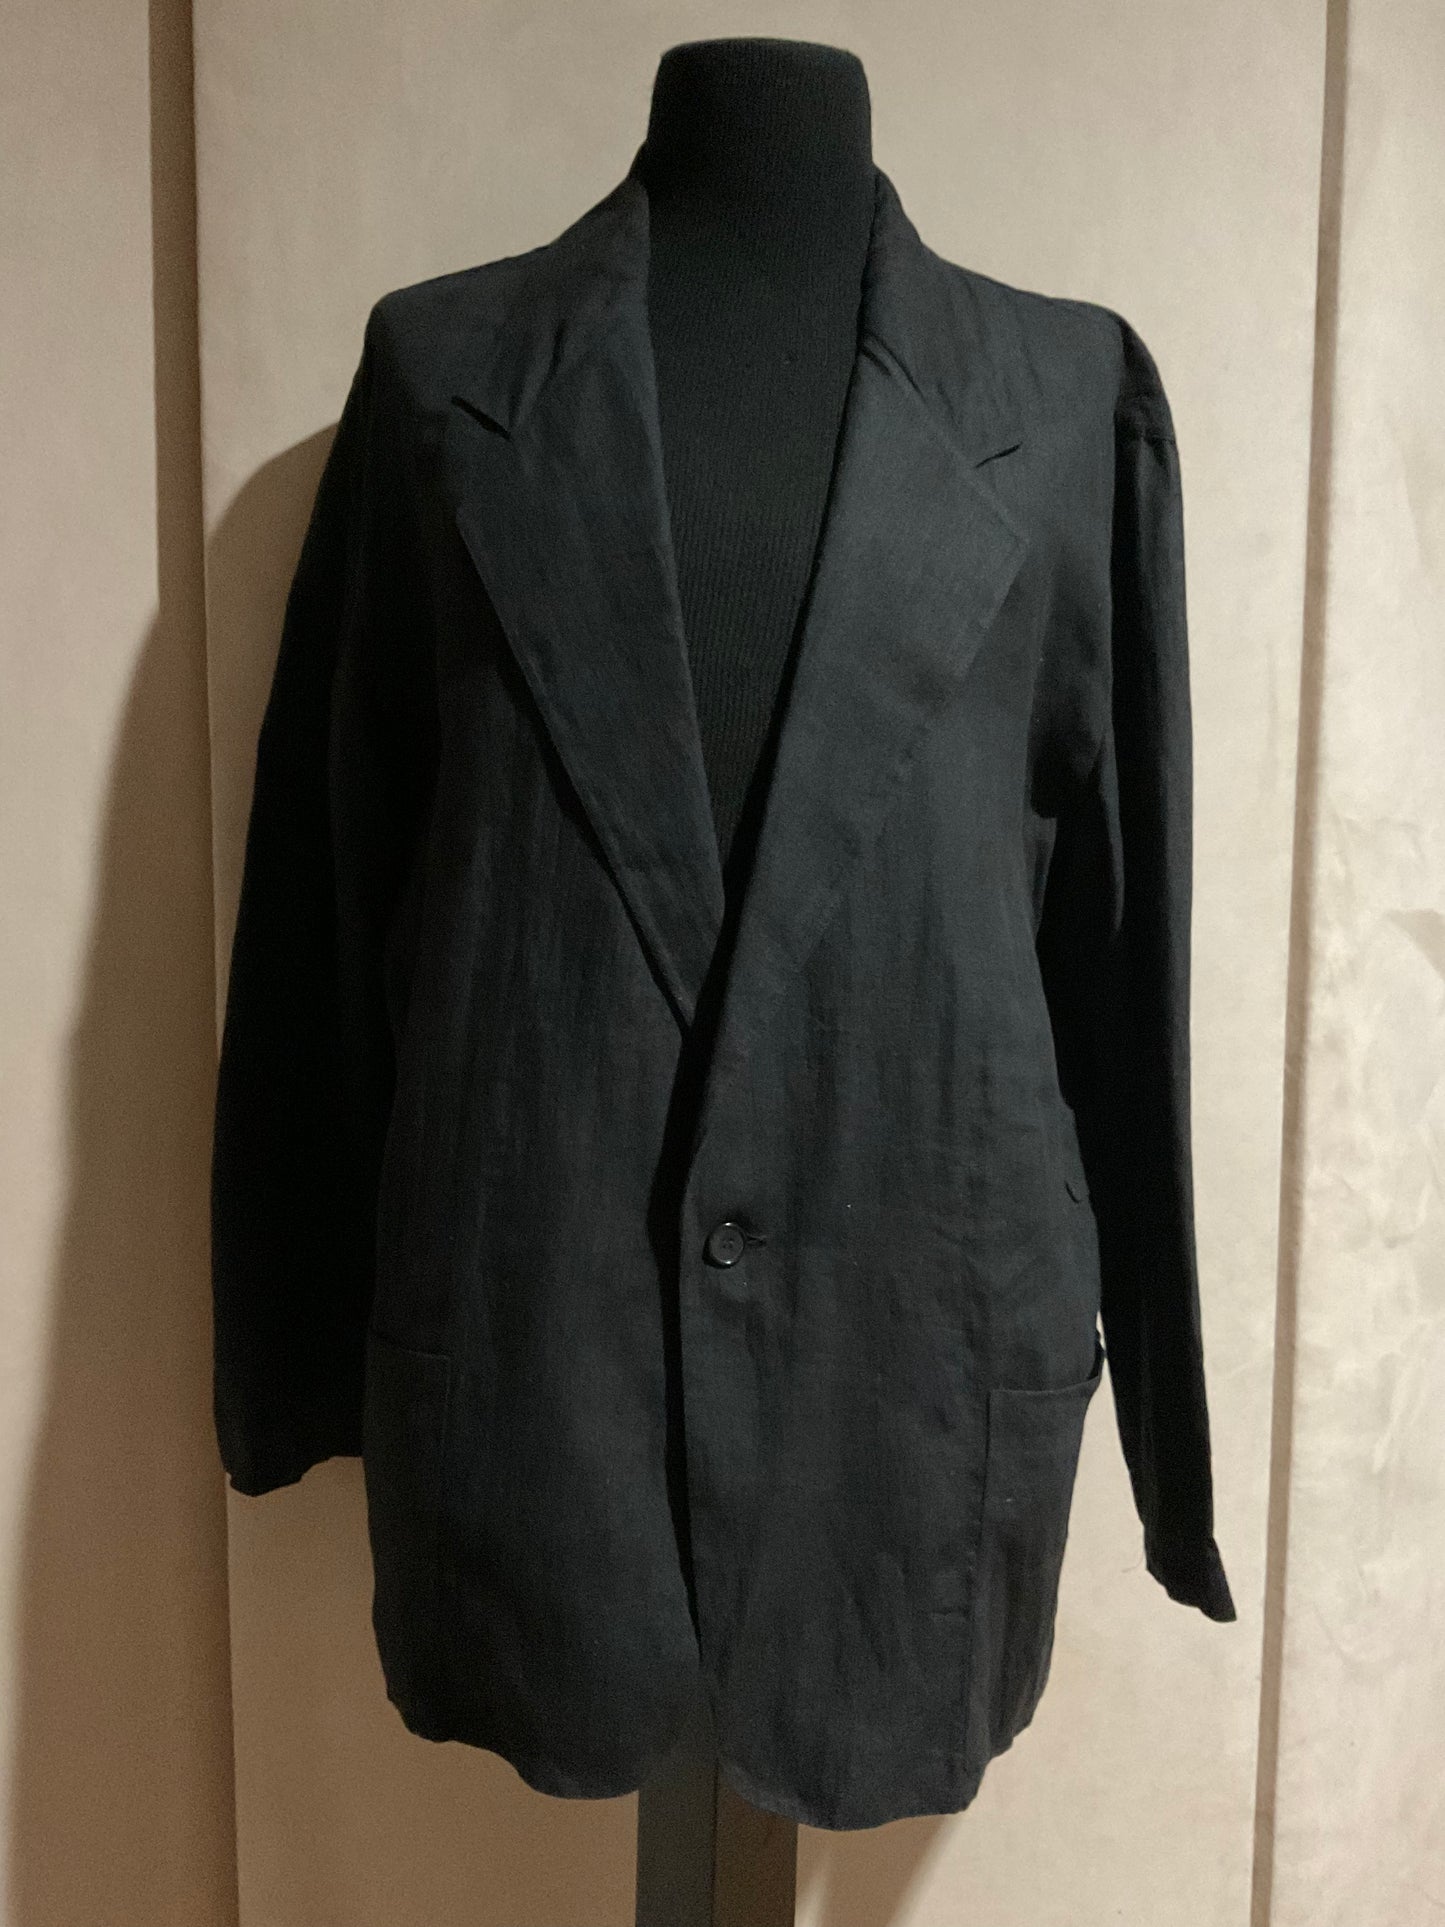 R P SPORTS JACKET / BLACK LINEN / UNCONSTRUCTED / LARGE - EXTRA LARGE / NEW / MADE IN ITALY